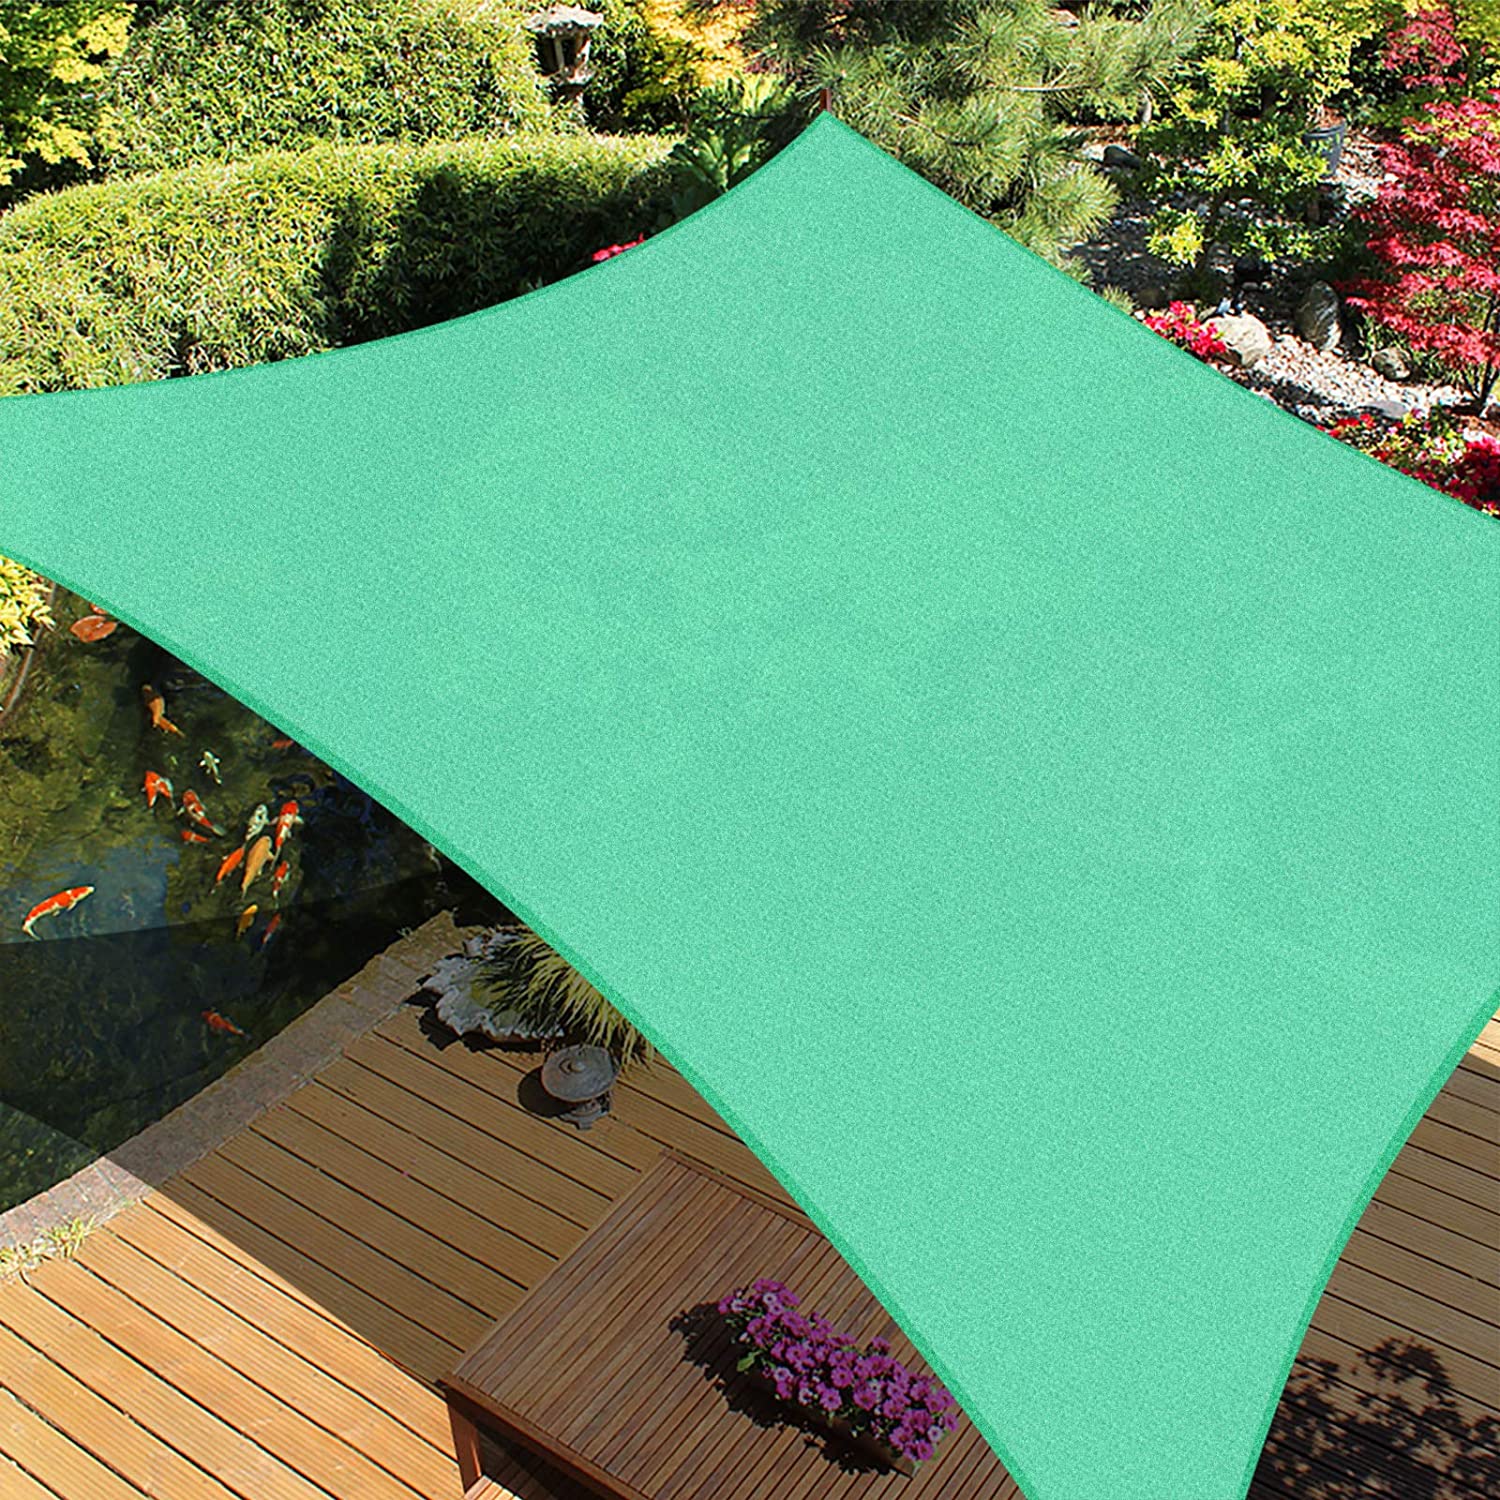 iCOVER Breathable HDPE Fabric Sun Shade